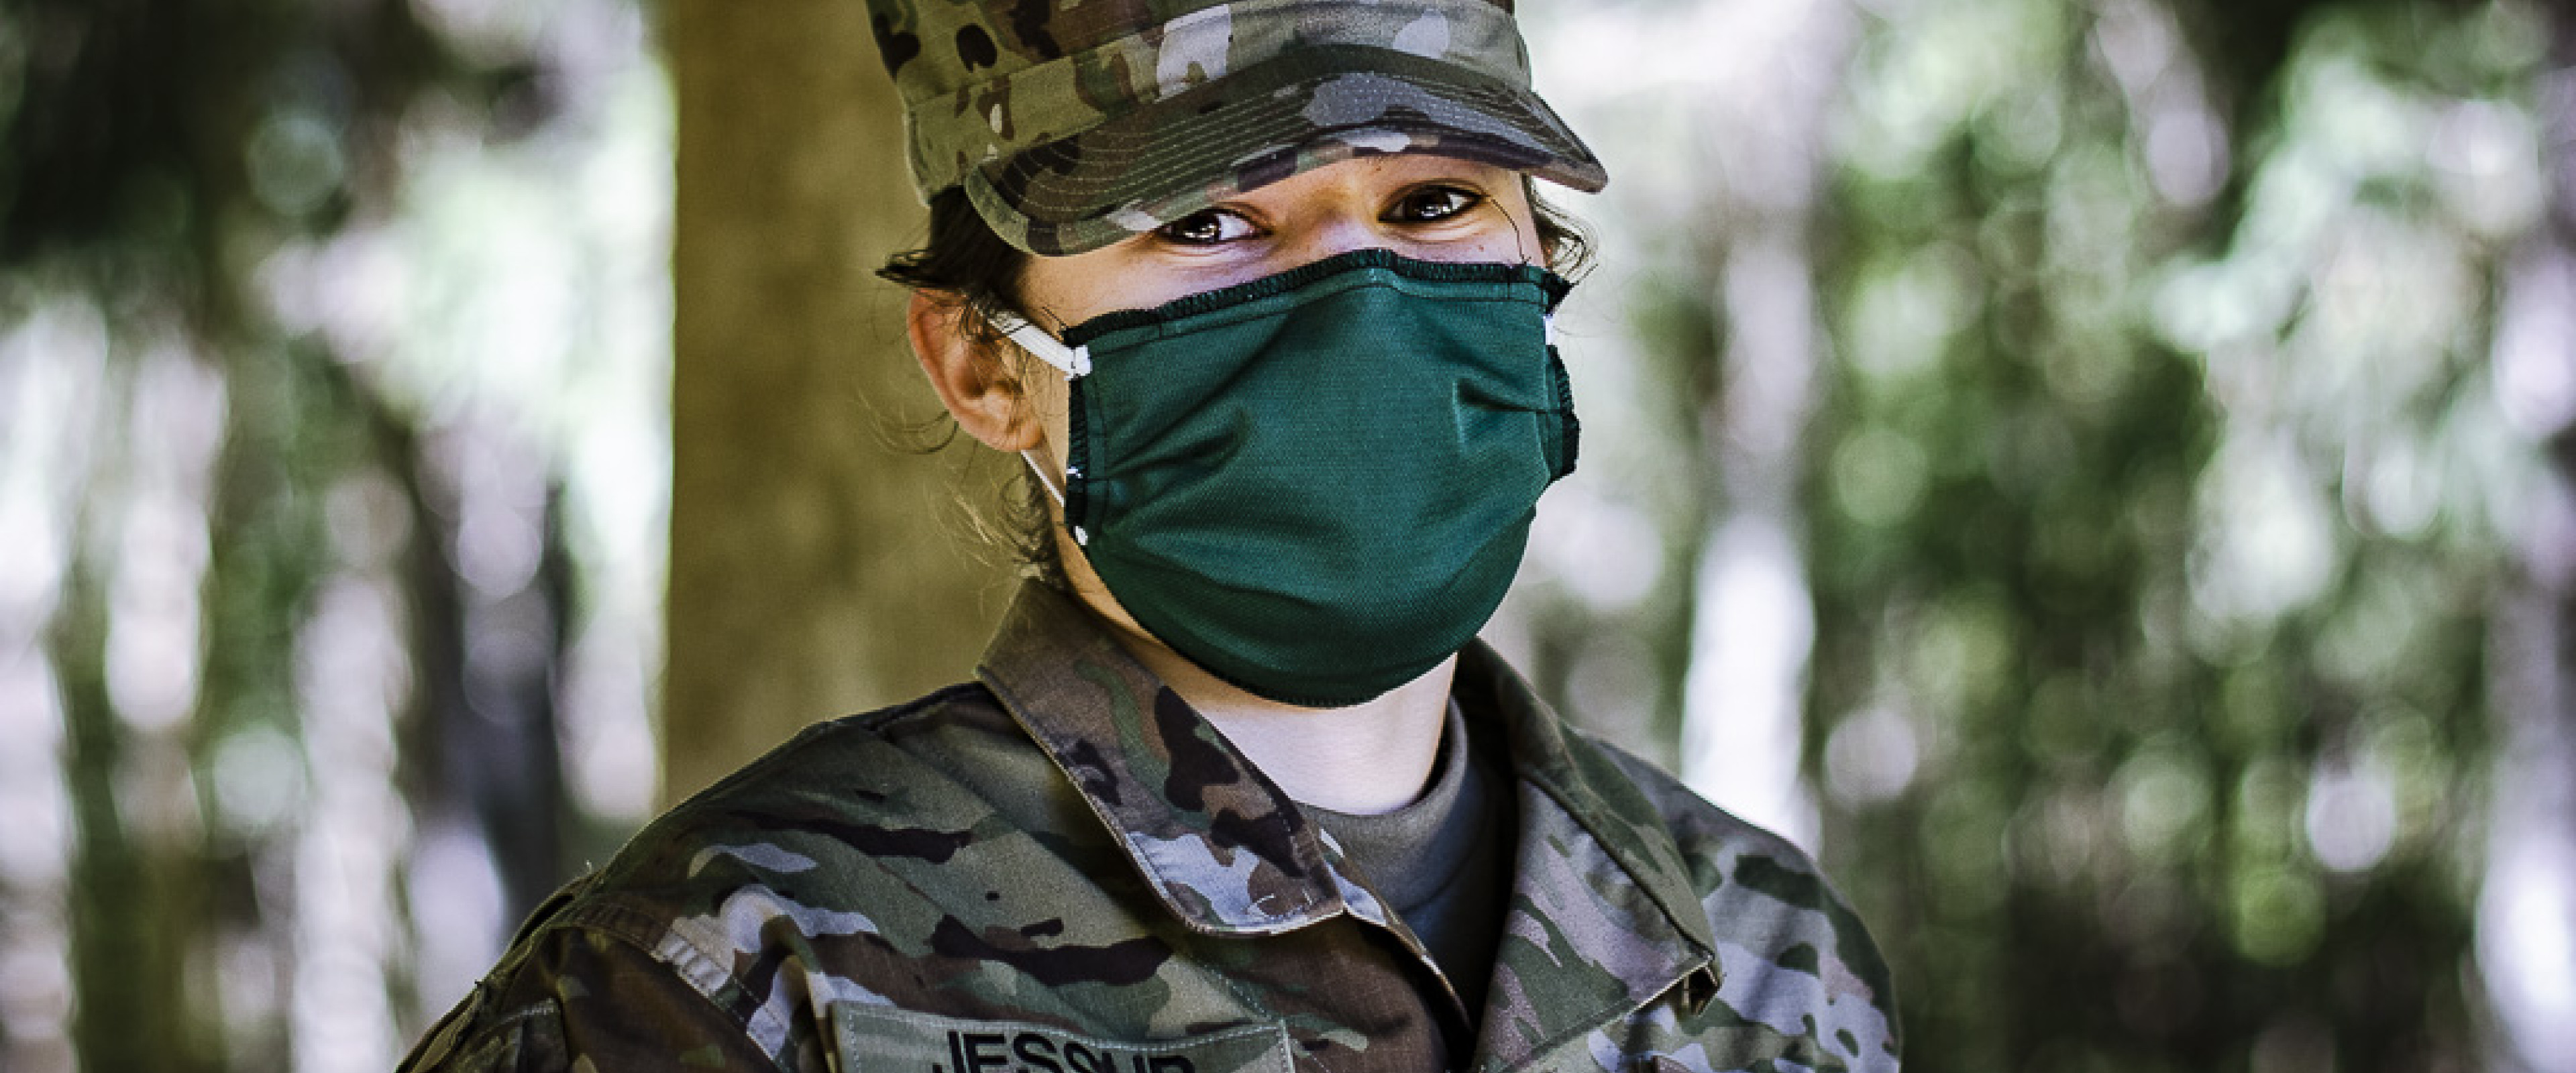 Cadet with mask